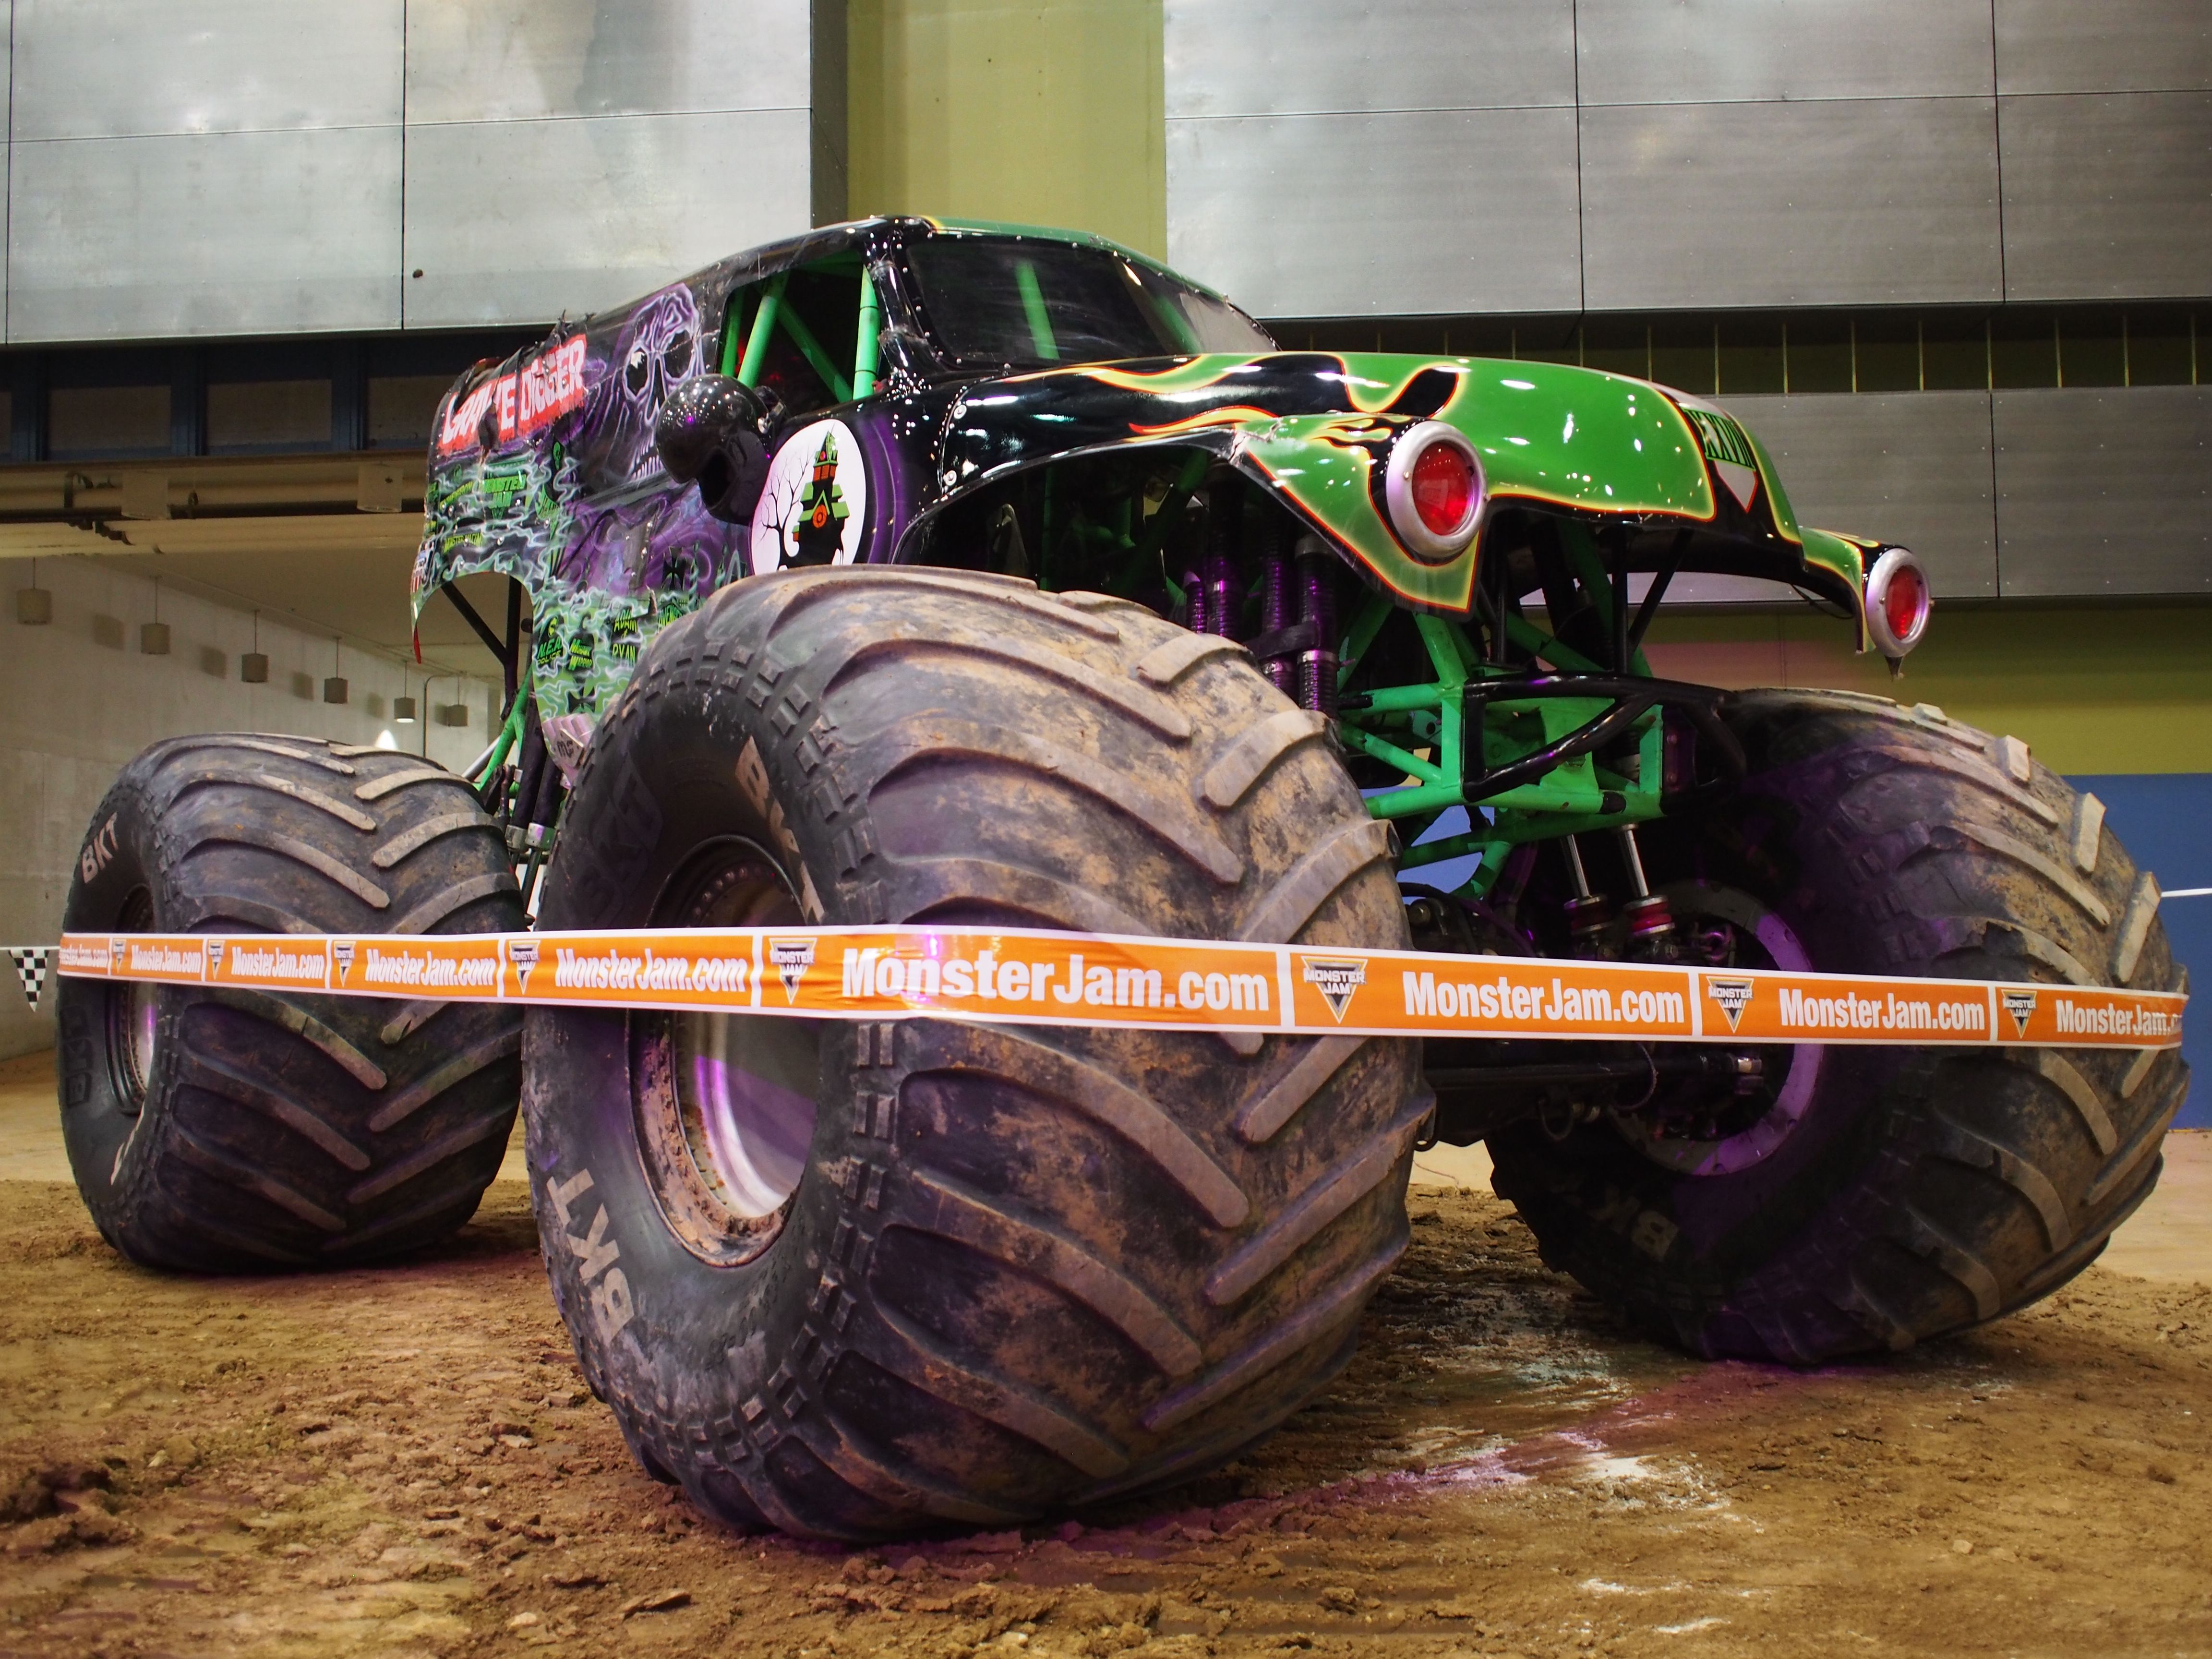 Monster truck rallies are becoming more popular in smaller venues